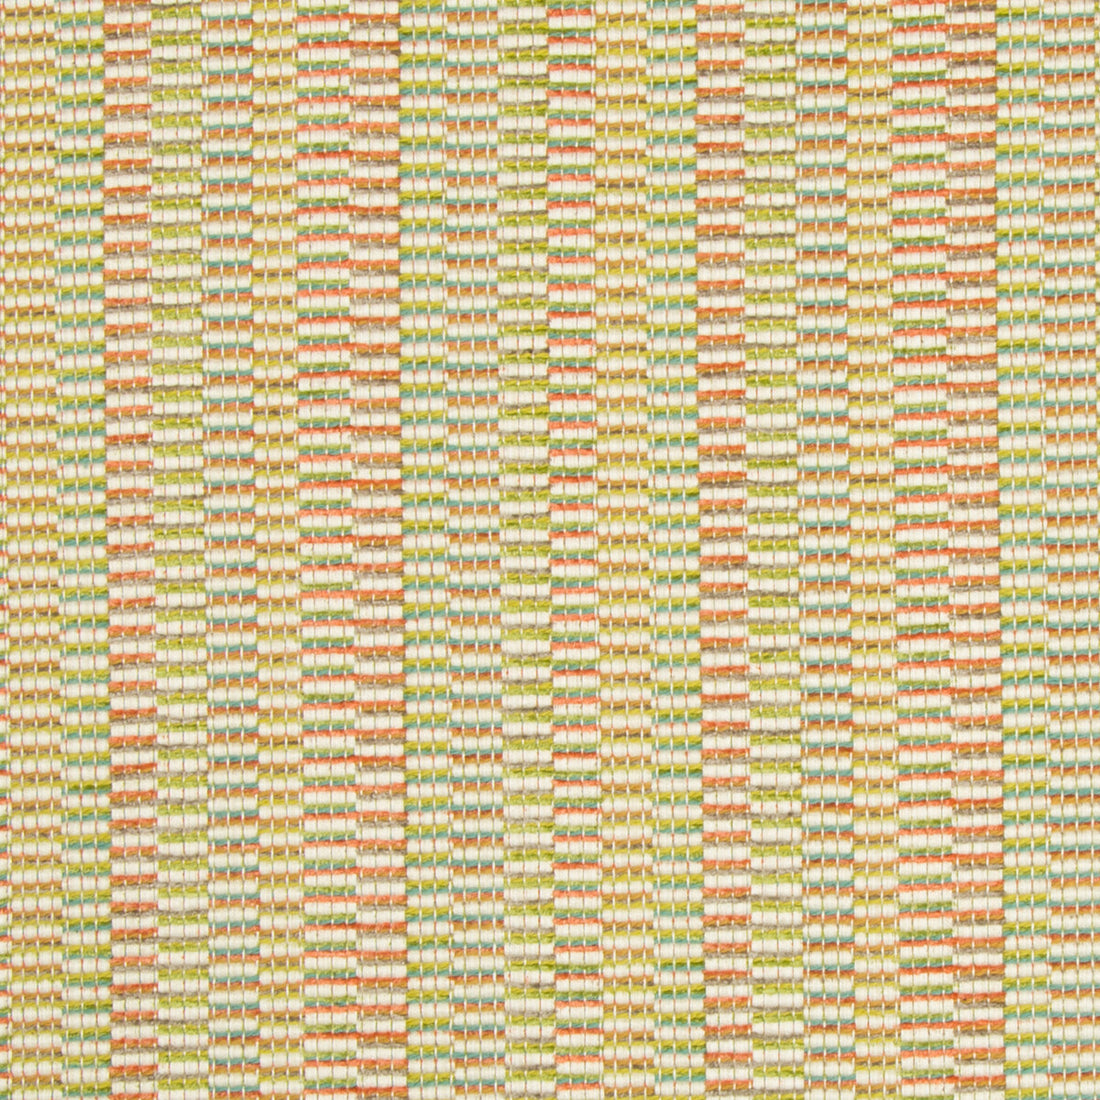 Kravet Design fabric in 34694-312 color - pattern 34694.312.0 - by Kravet Design in the Crypton Home collection